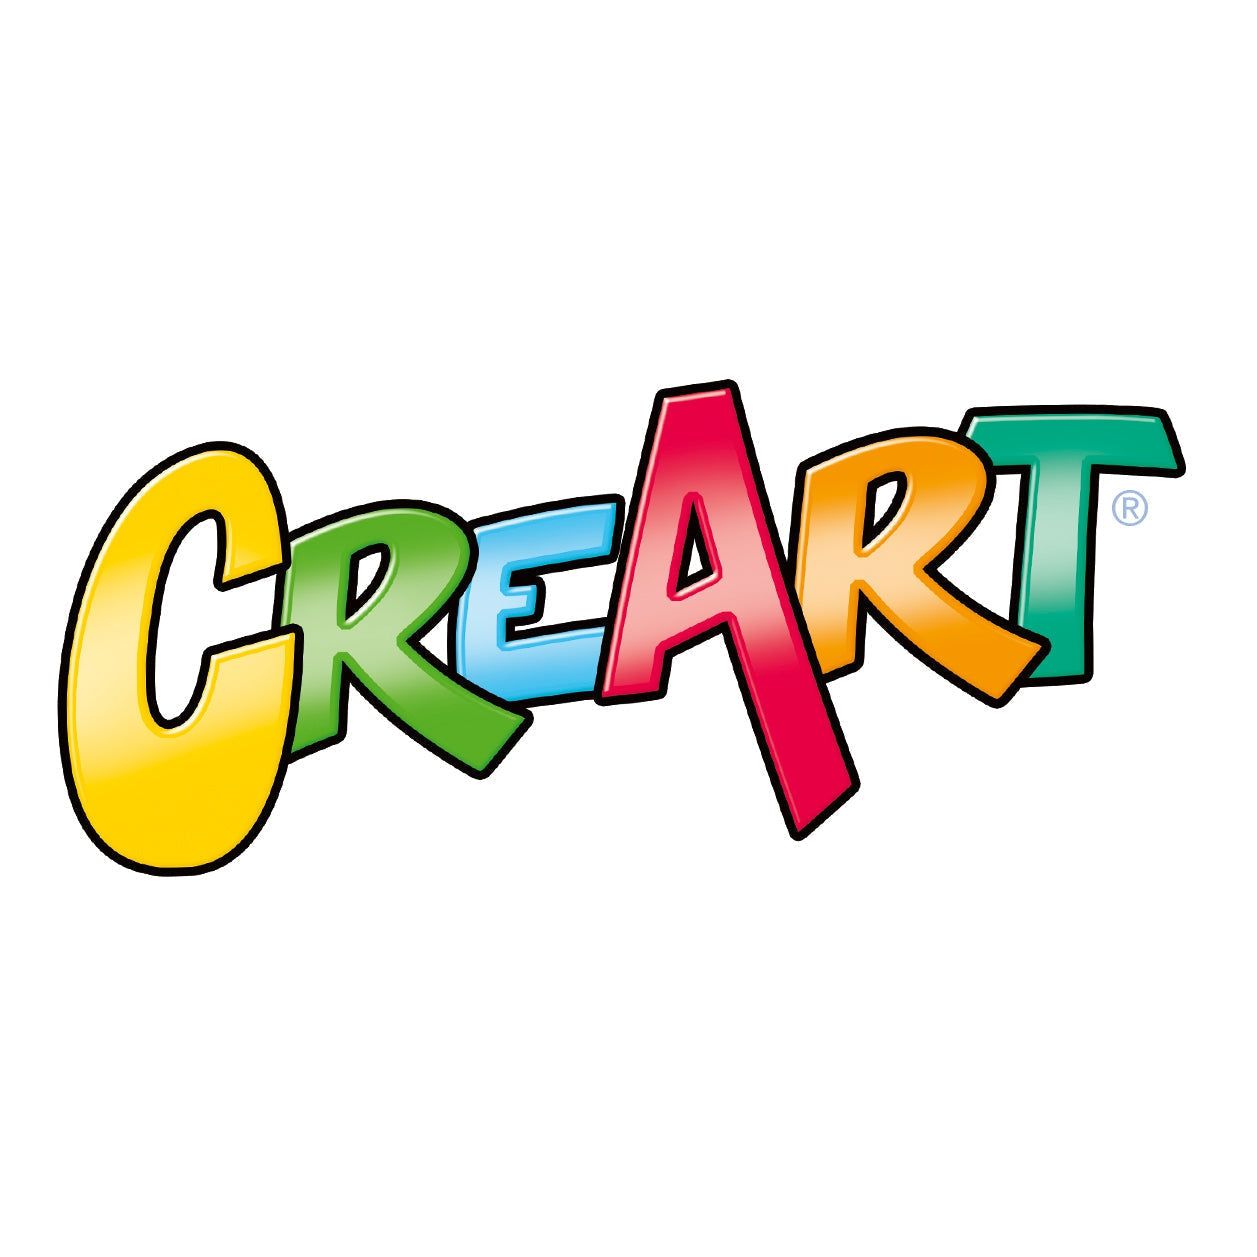 CreArt Paint by Numbers - Pokemon